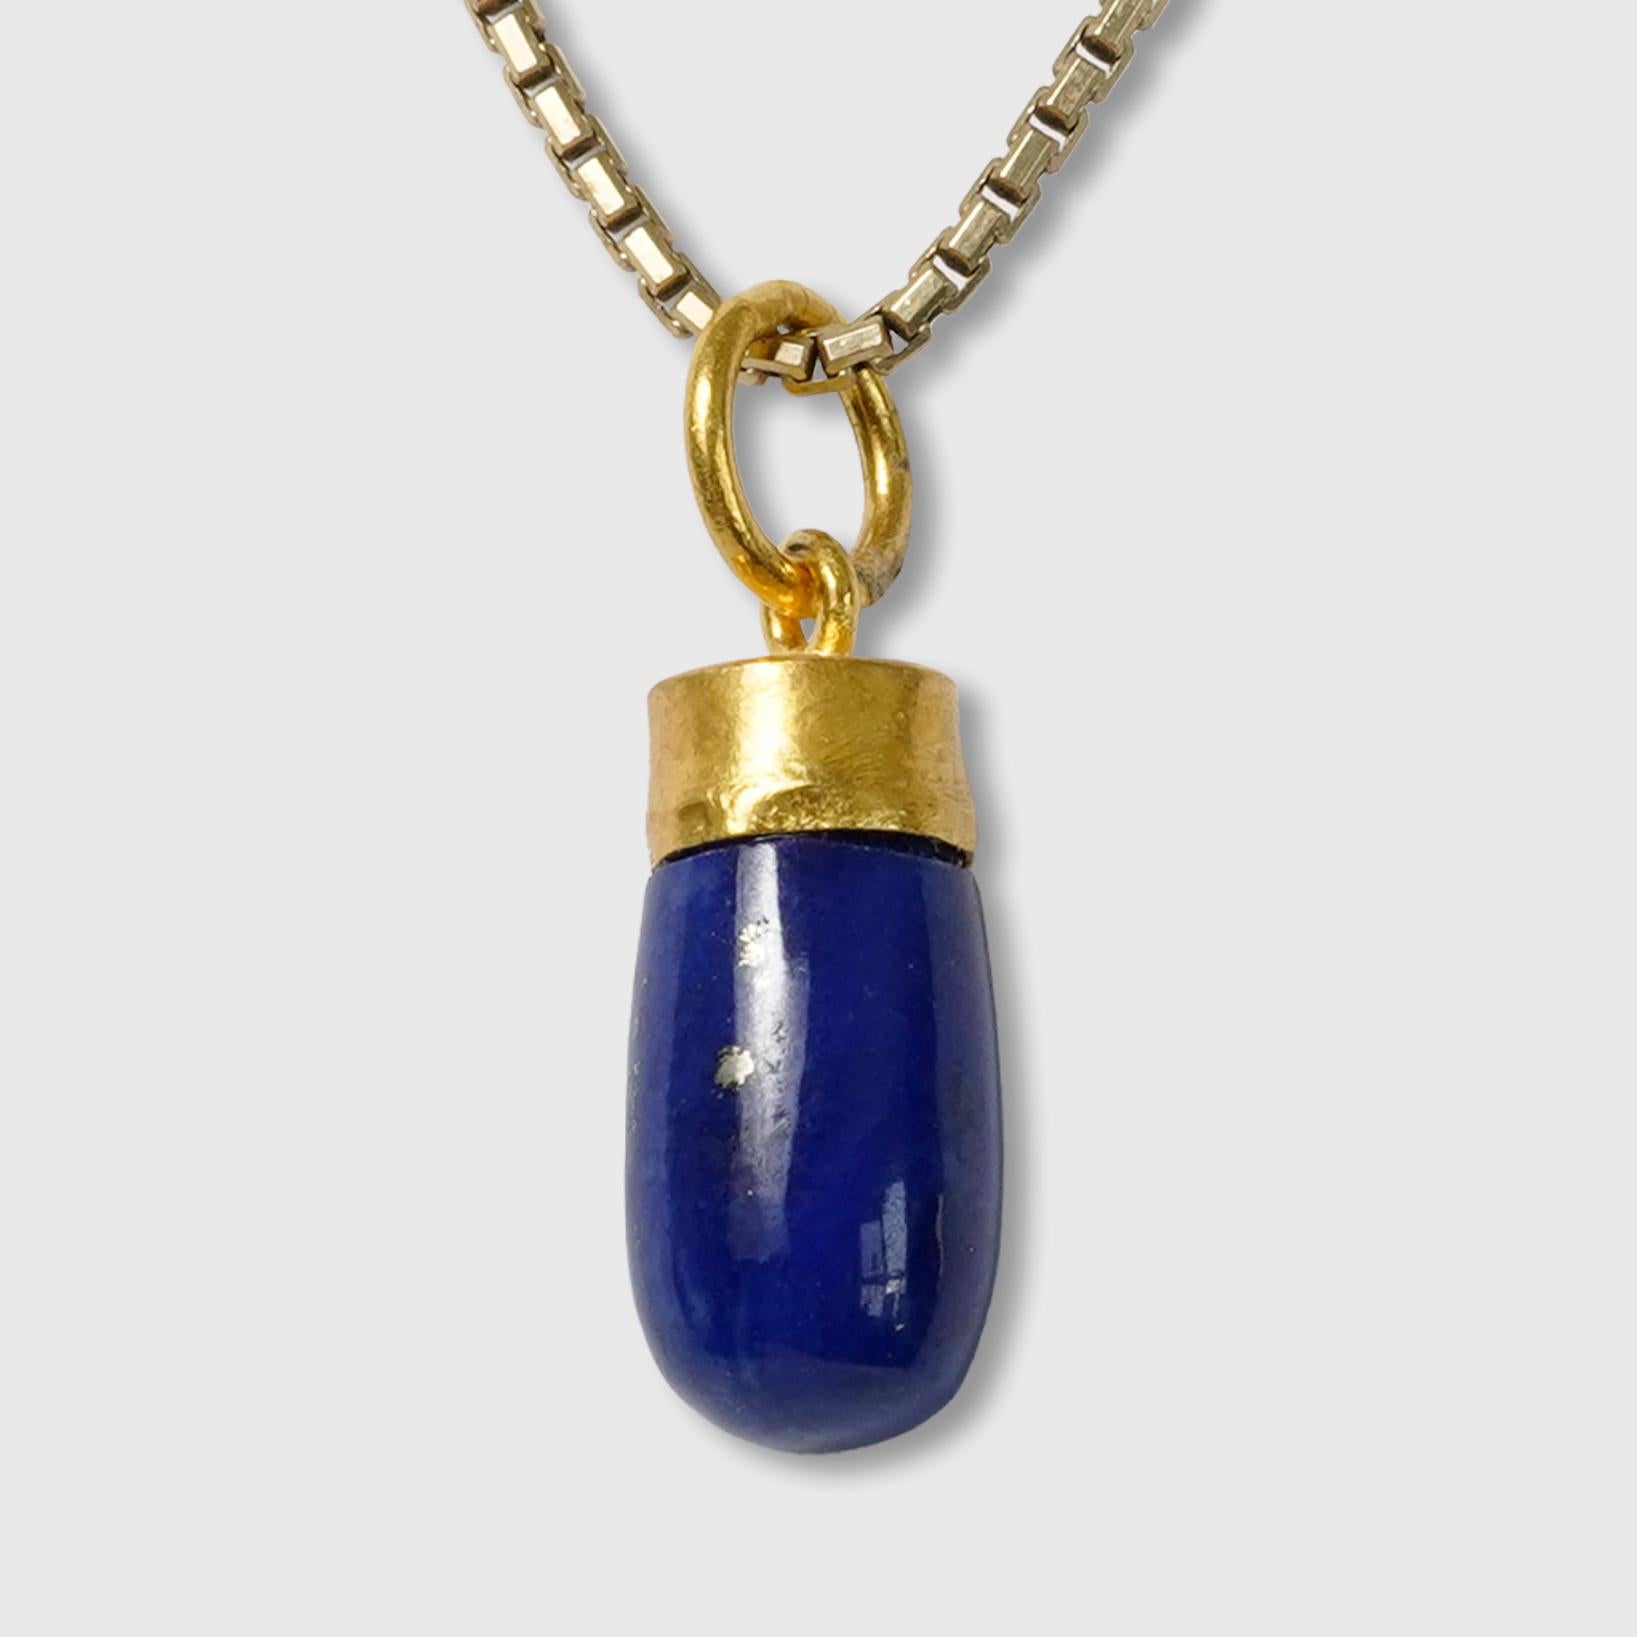 24kt Yellow Gold 7.00ct Lapis Lazuli Drop Charm Pendant Necklace

Lapis - 7.00 ct
24kt Gold 995 - 0.80 grams
Sterling Silver 925 - 0.80 grams

THE STORY: 

Top-quality Lapis Lazuli comes from Afghanistan where it has been mined for more than 6,500